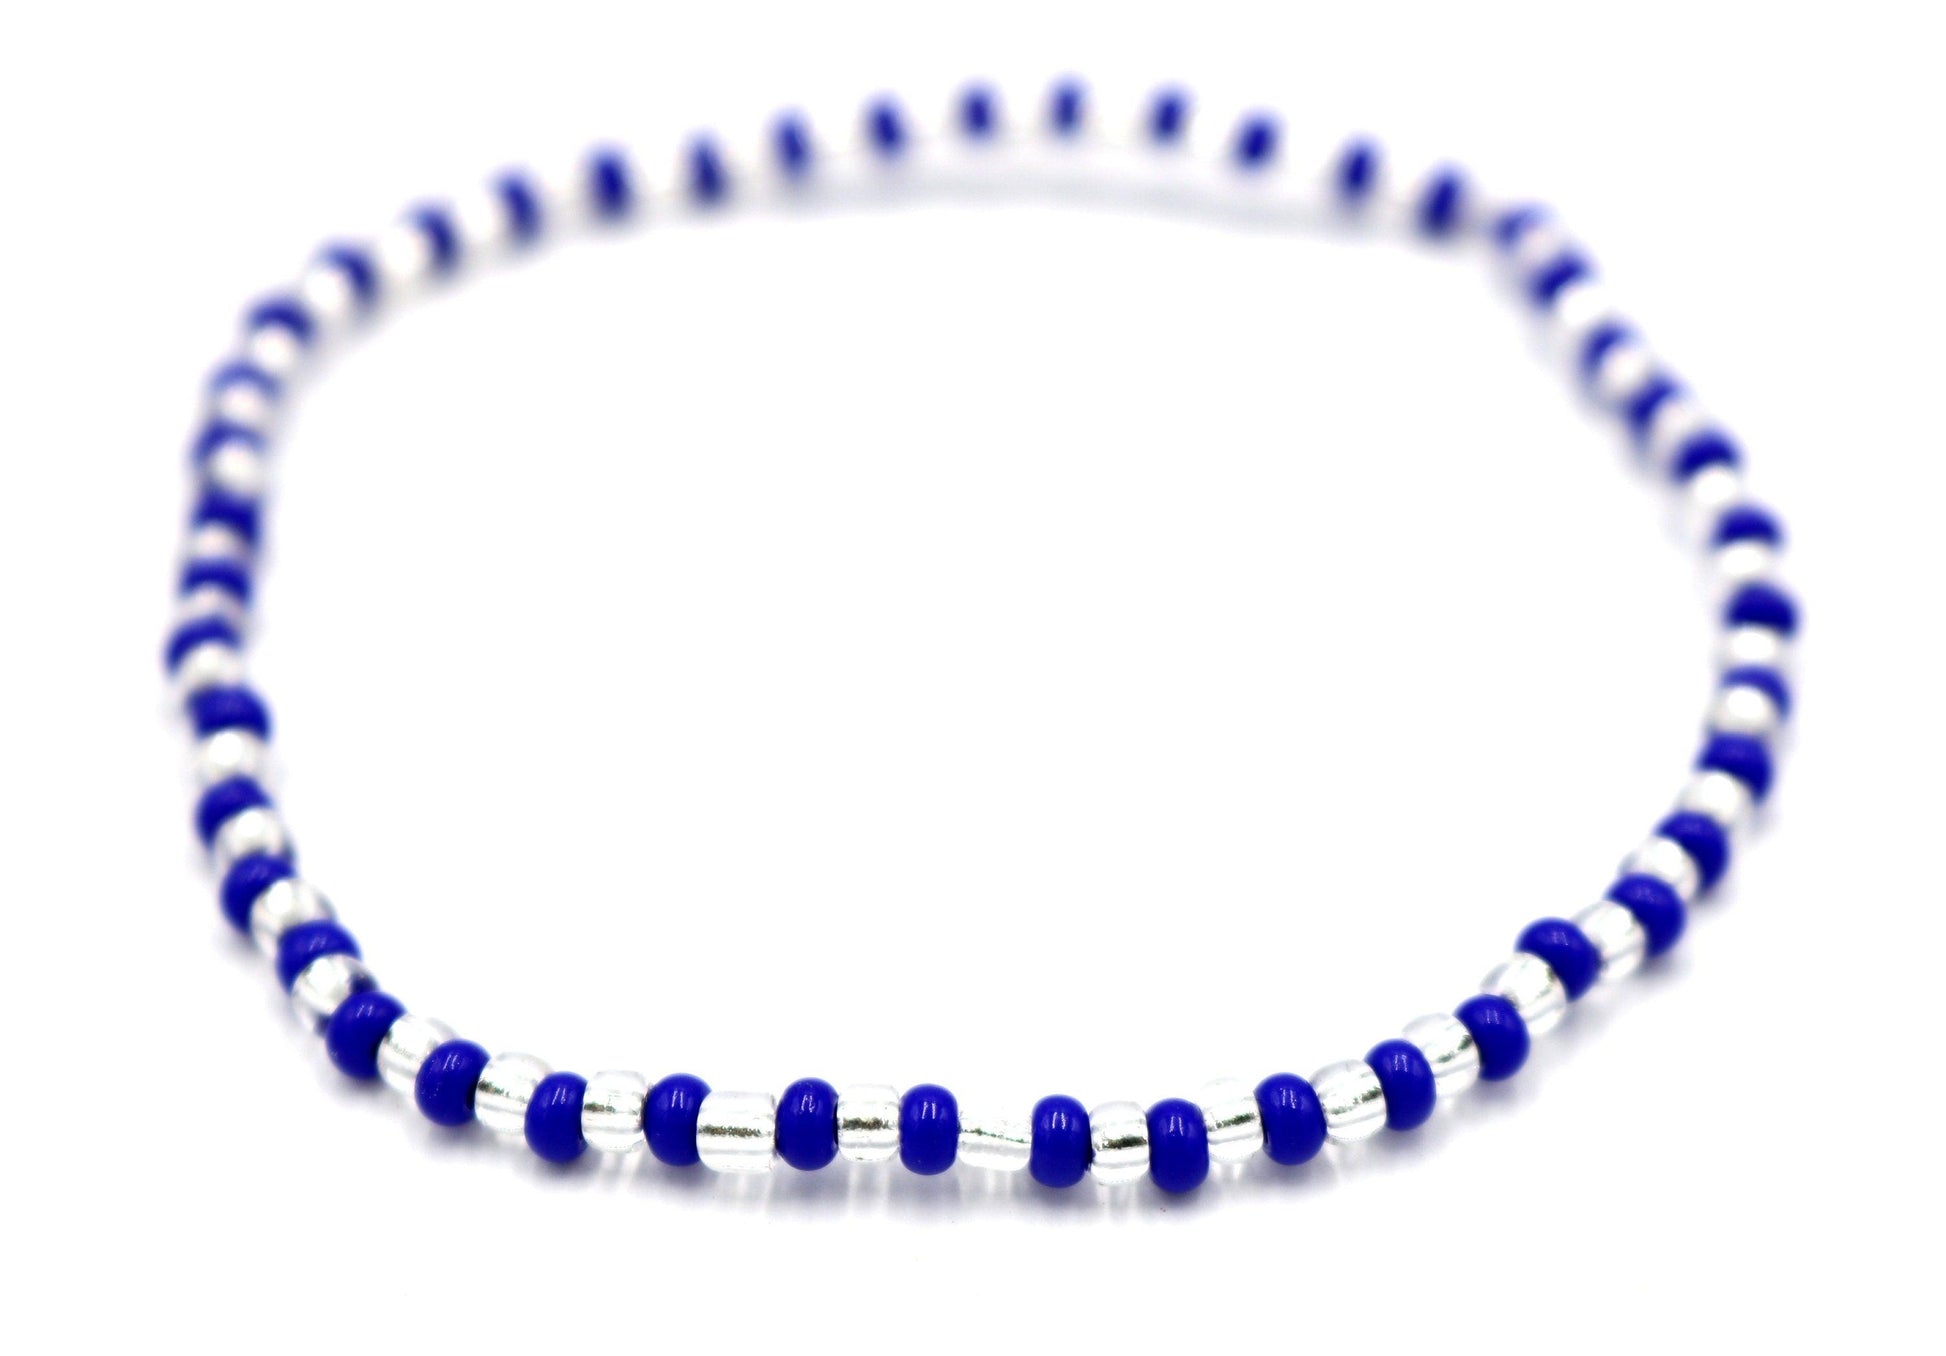 Calling All Cowboy Fans! NFL Mania is Here Show Your Team Spirit with This Fun Glass Seed Bead Stretch Blue & Silver Bracelet - Monkeysmojo